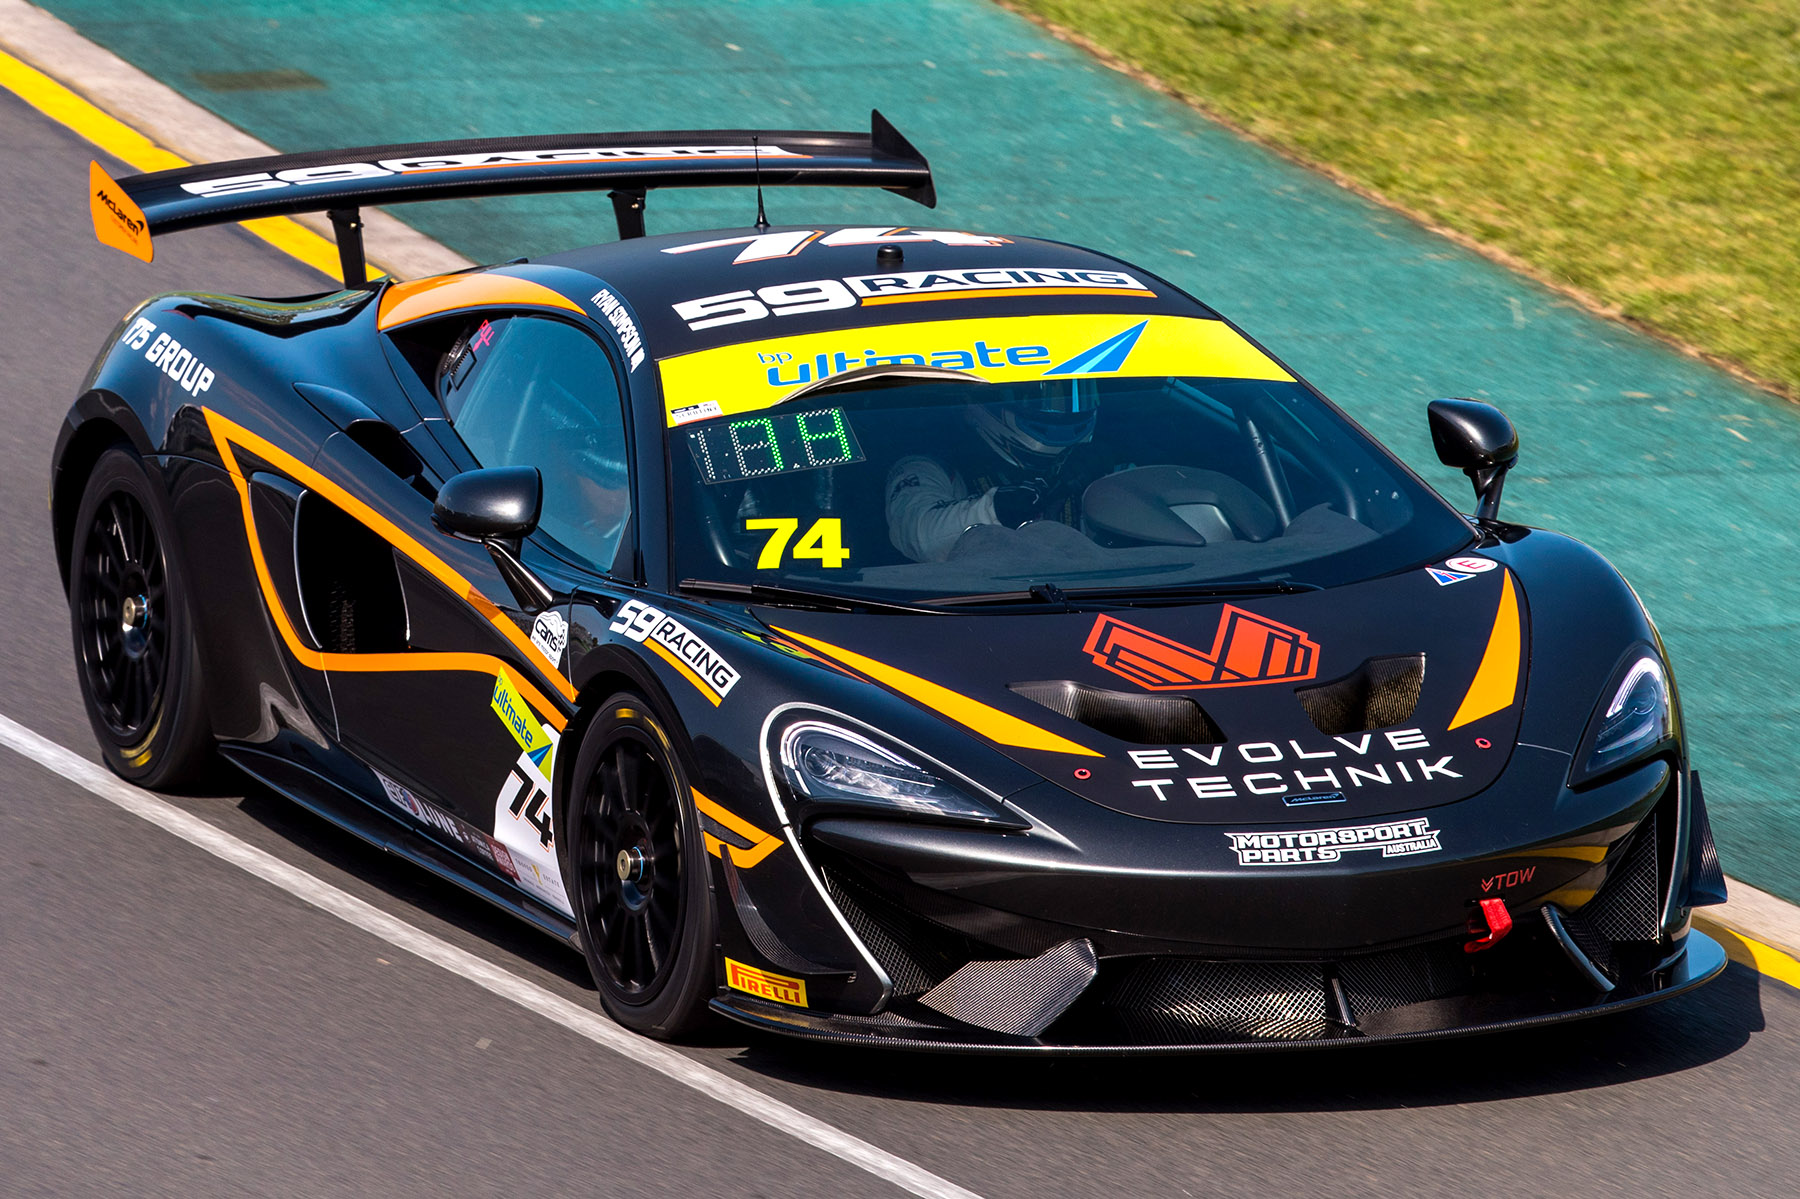 59Racing – Focus on young drivers in Australian GT